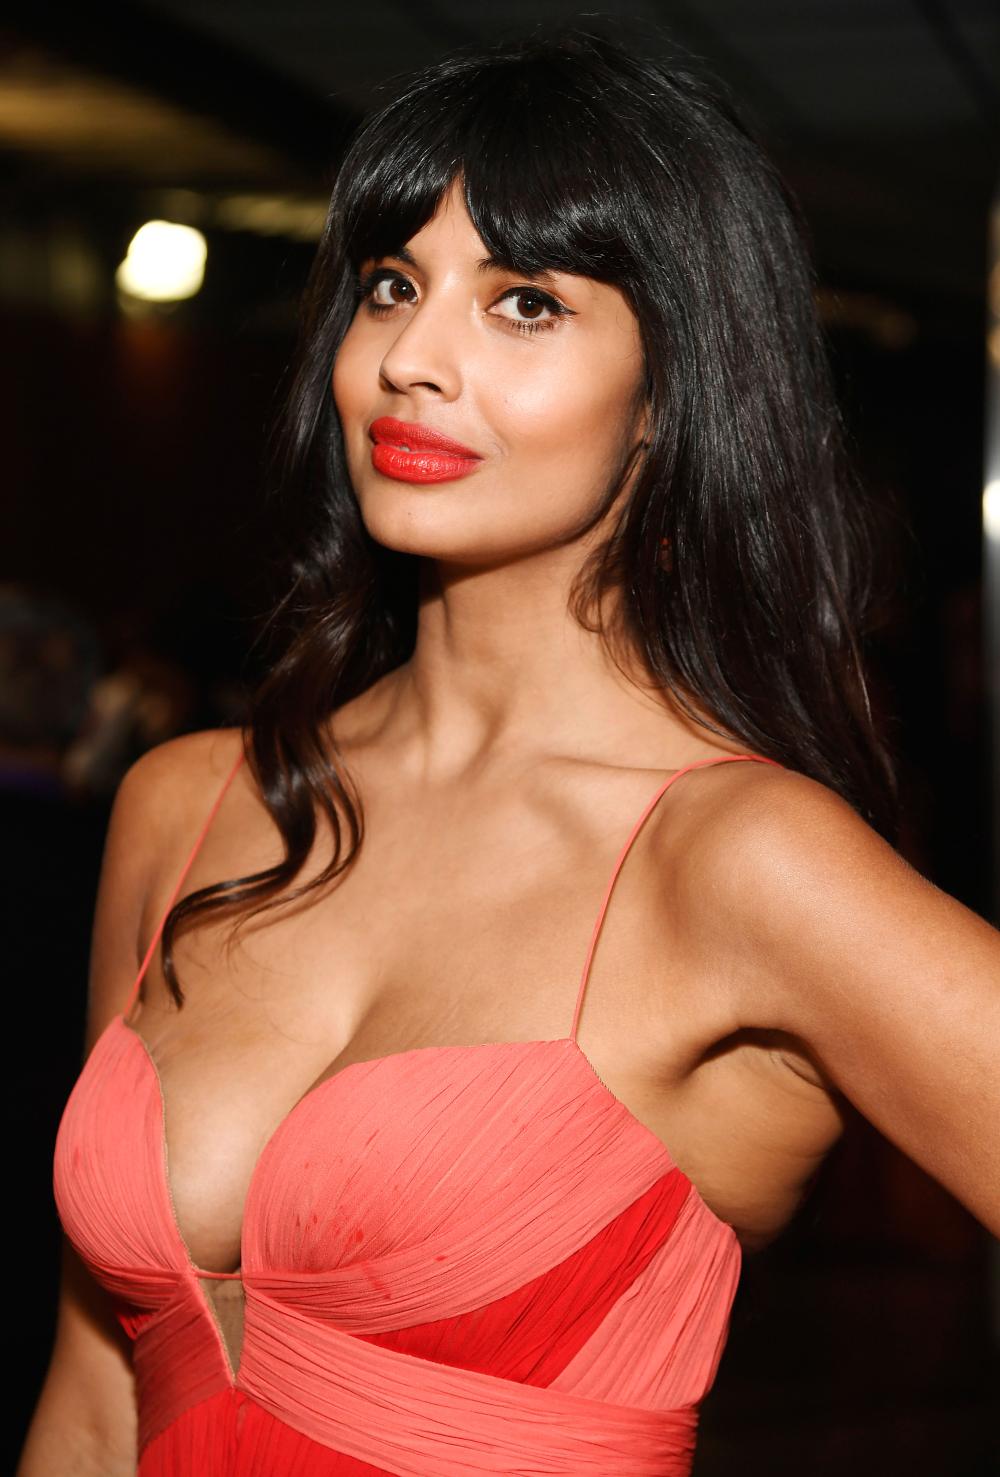 Jameela Jamil Isn't Here for the Kardashians' Response to Her Criticism: 'Thank You, Next'